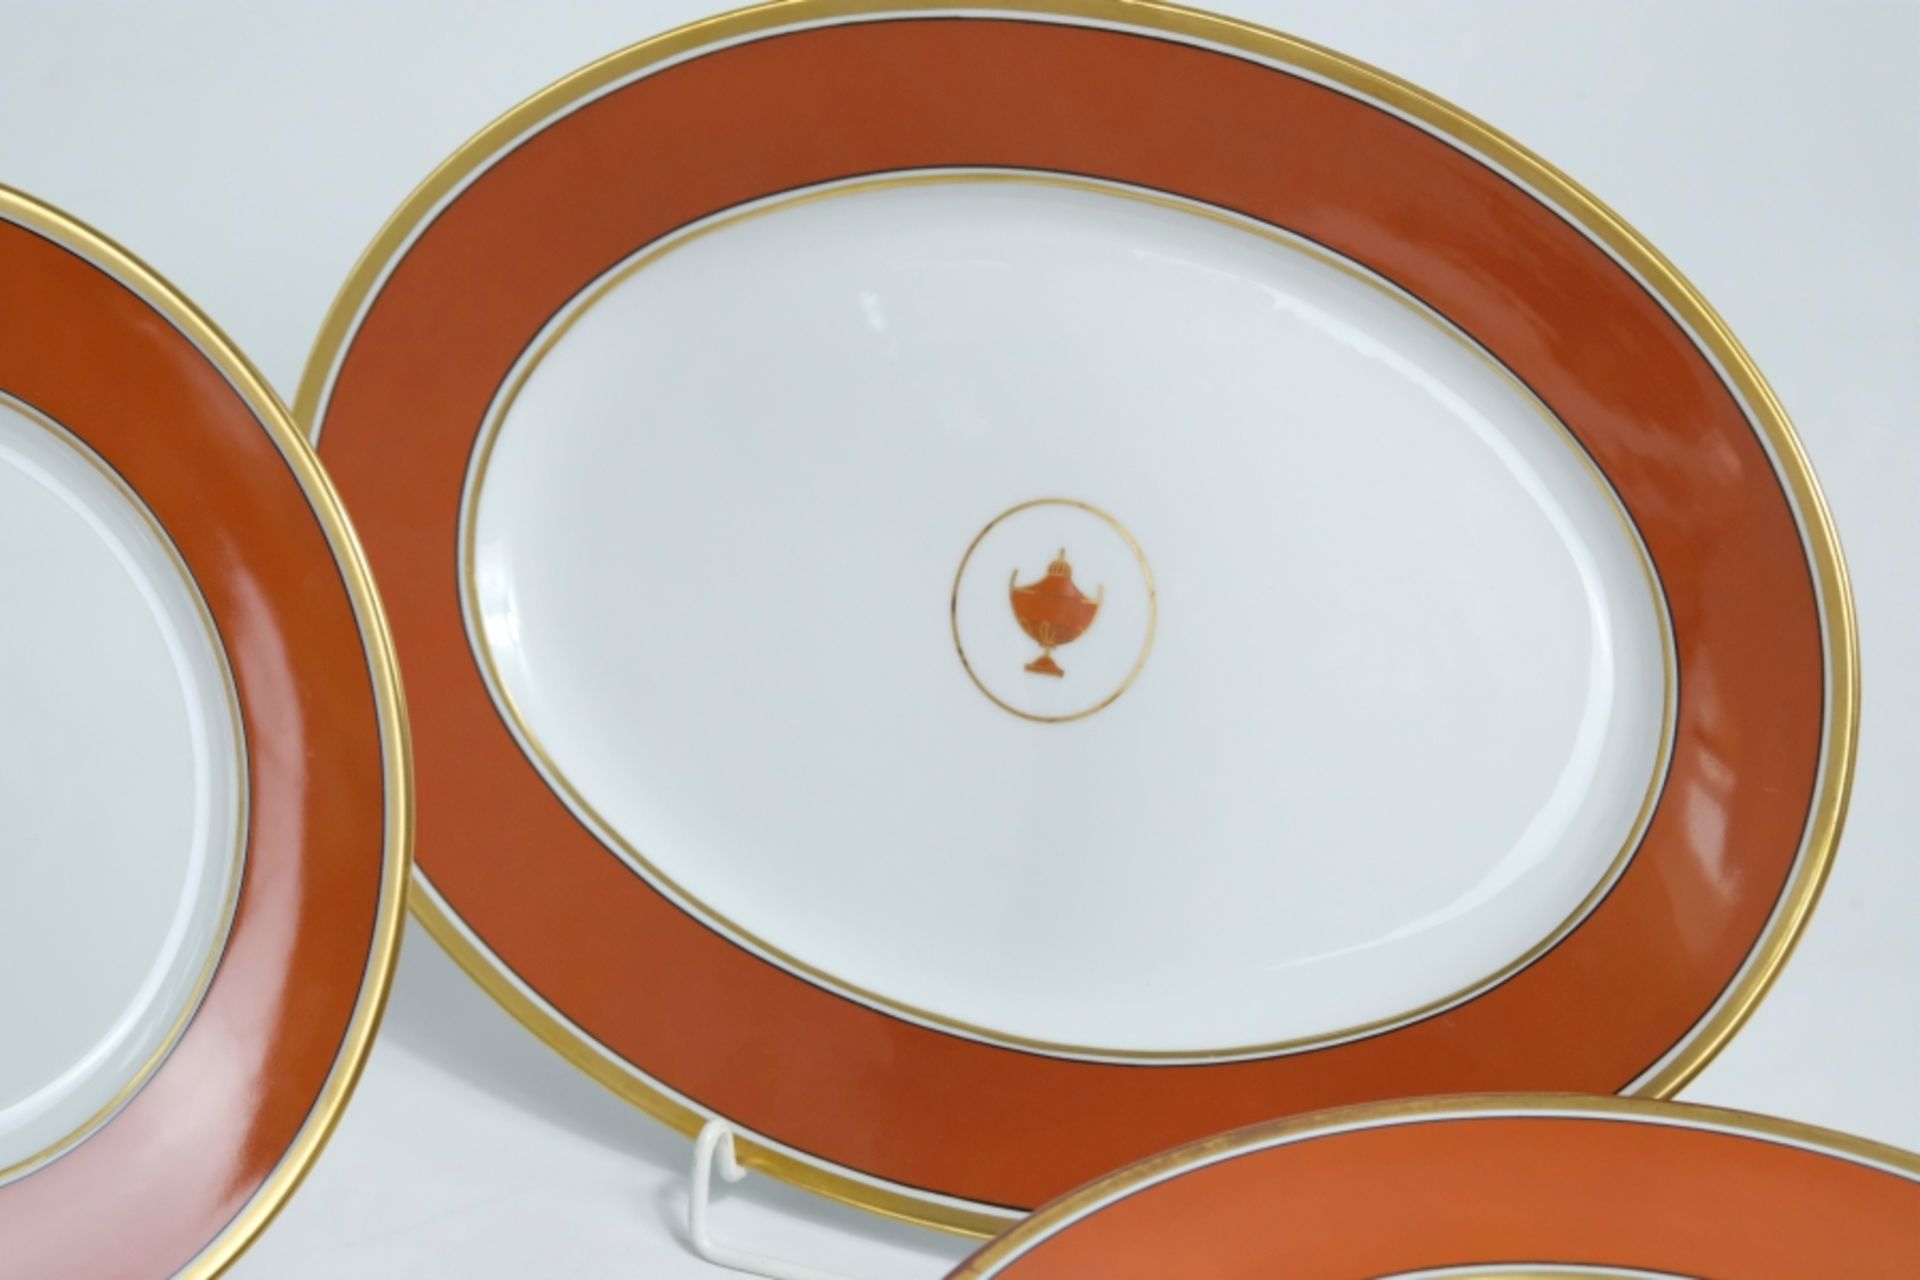 Richard Ginori "Contessa" dinner service, porcelain, white and terracotta with gold rim, consisting - Image 3 of 8